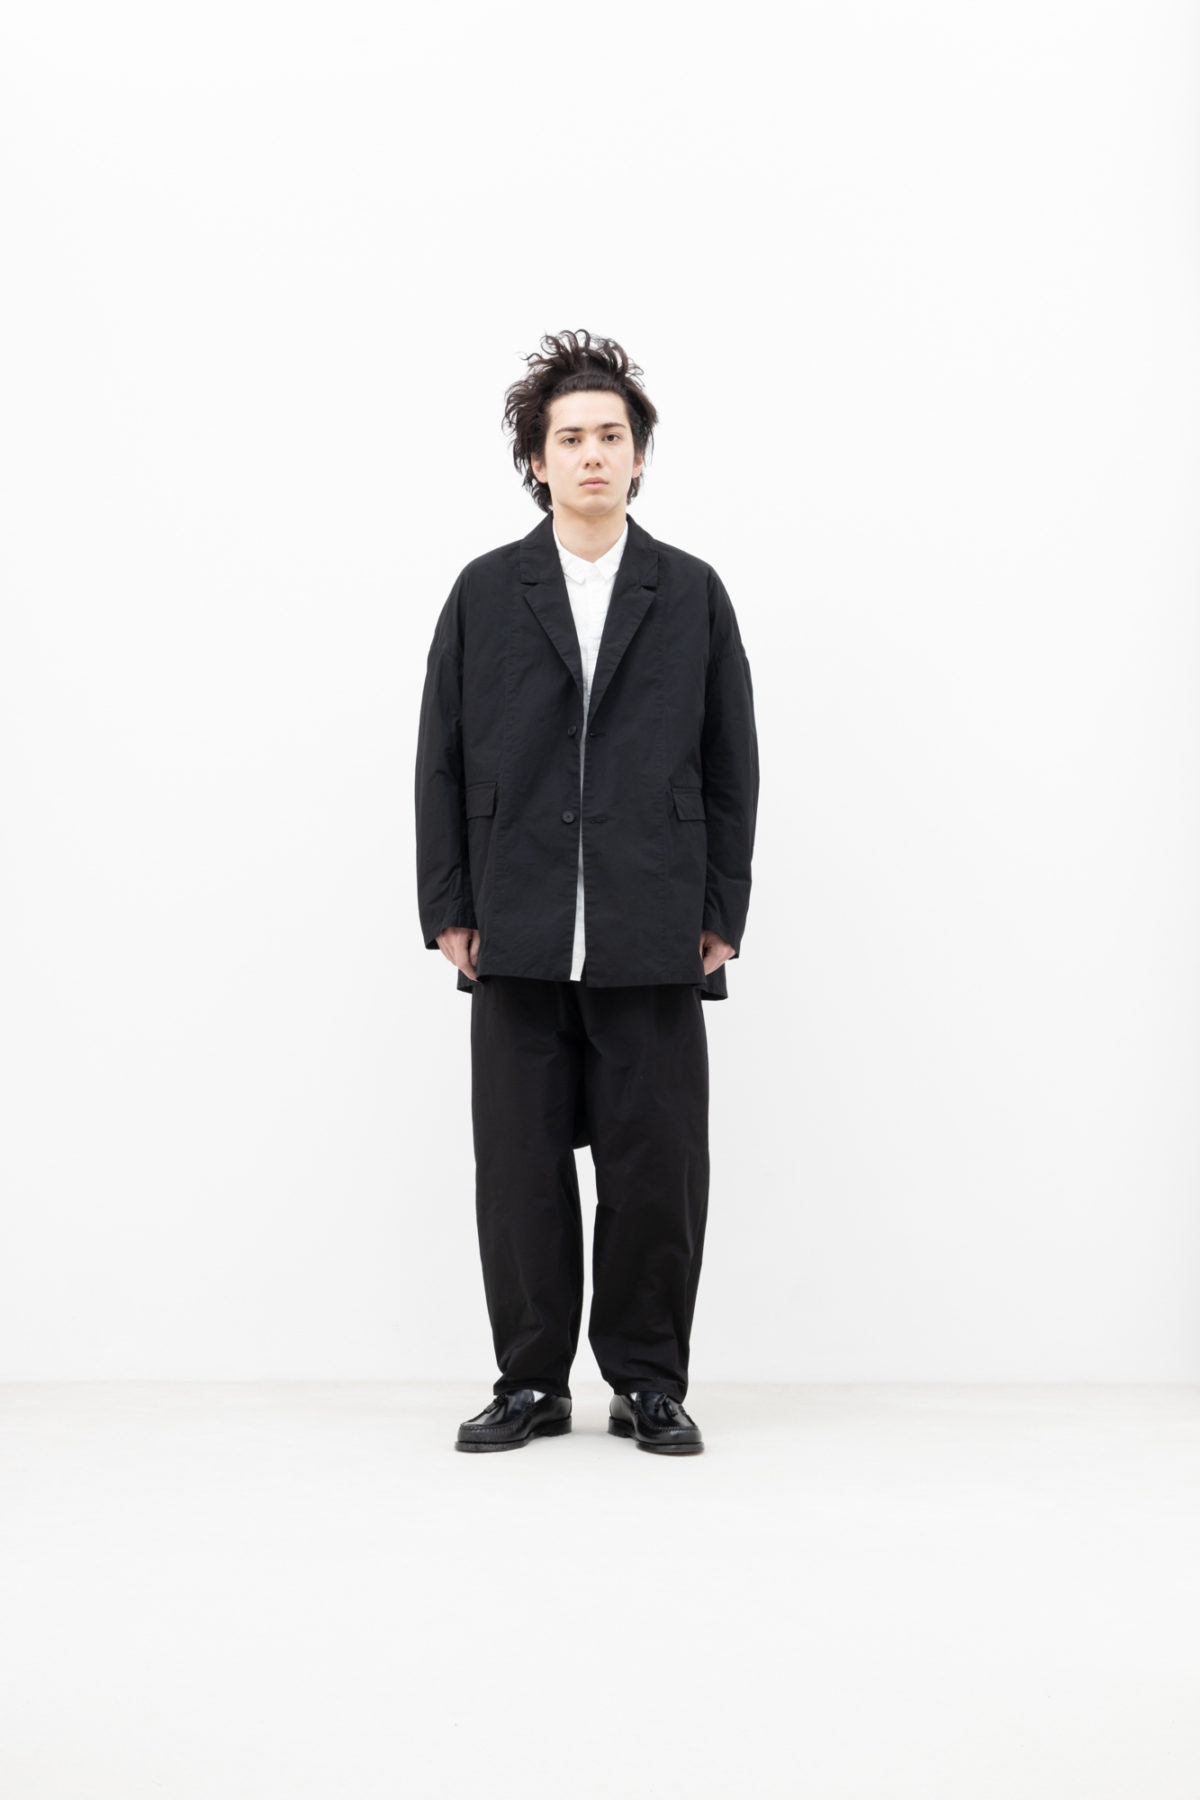 No. 031 | 2020 AW MENS | LOOK | FIRMUM